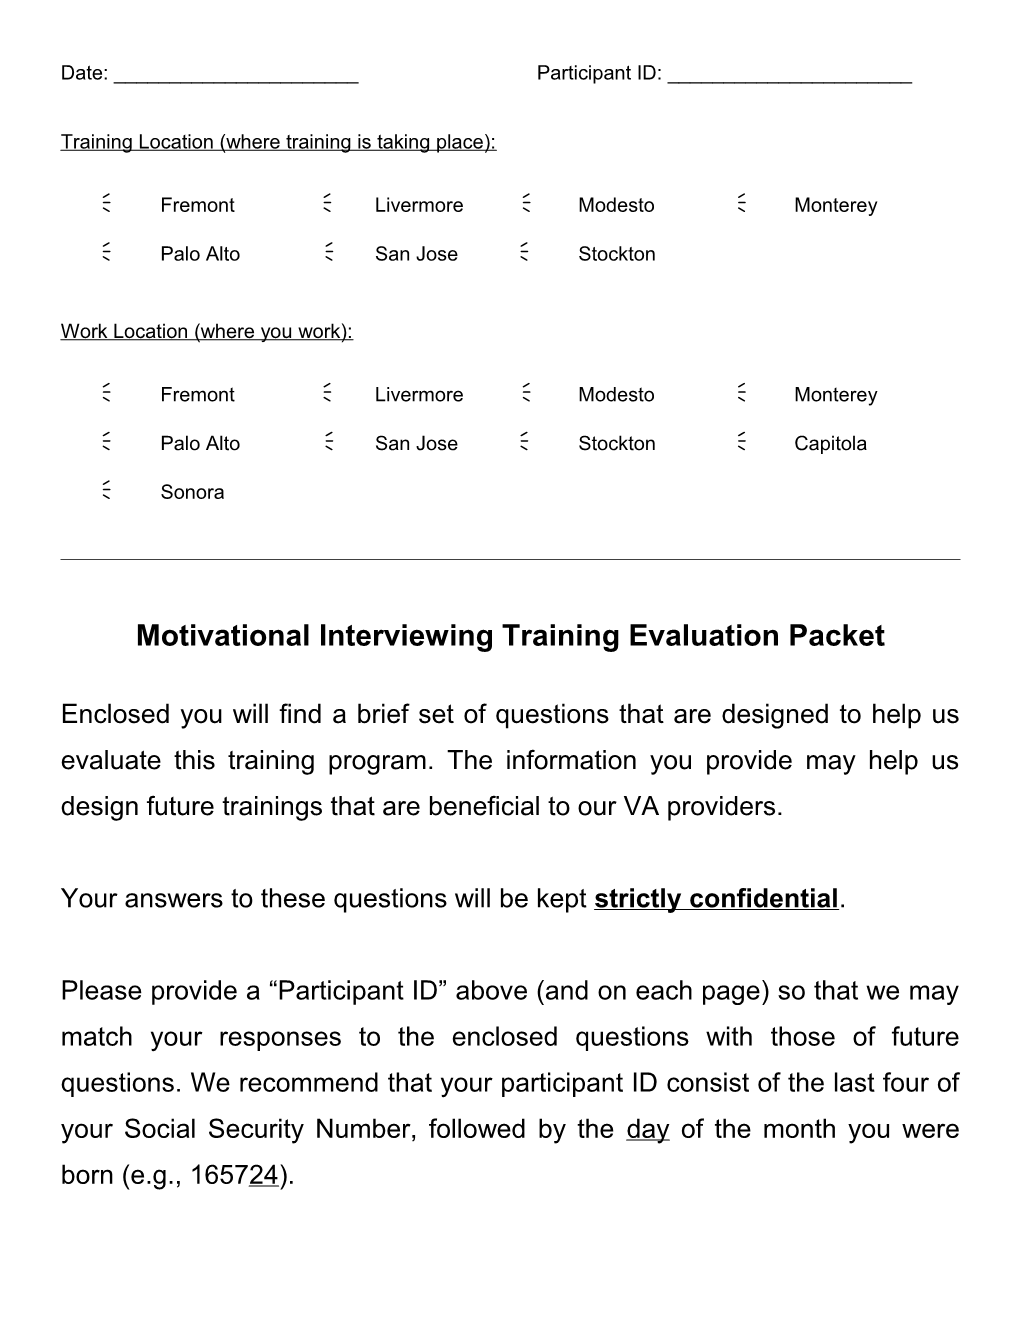 Motivational Interviewing Training Evaluation Packet